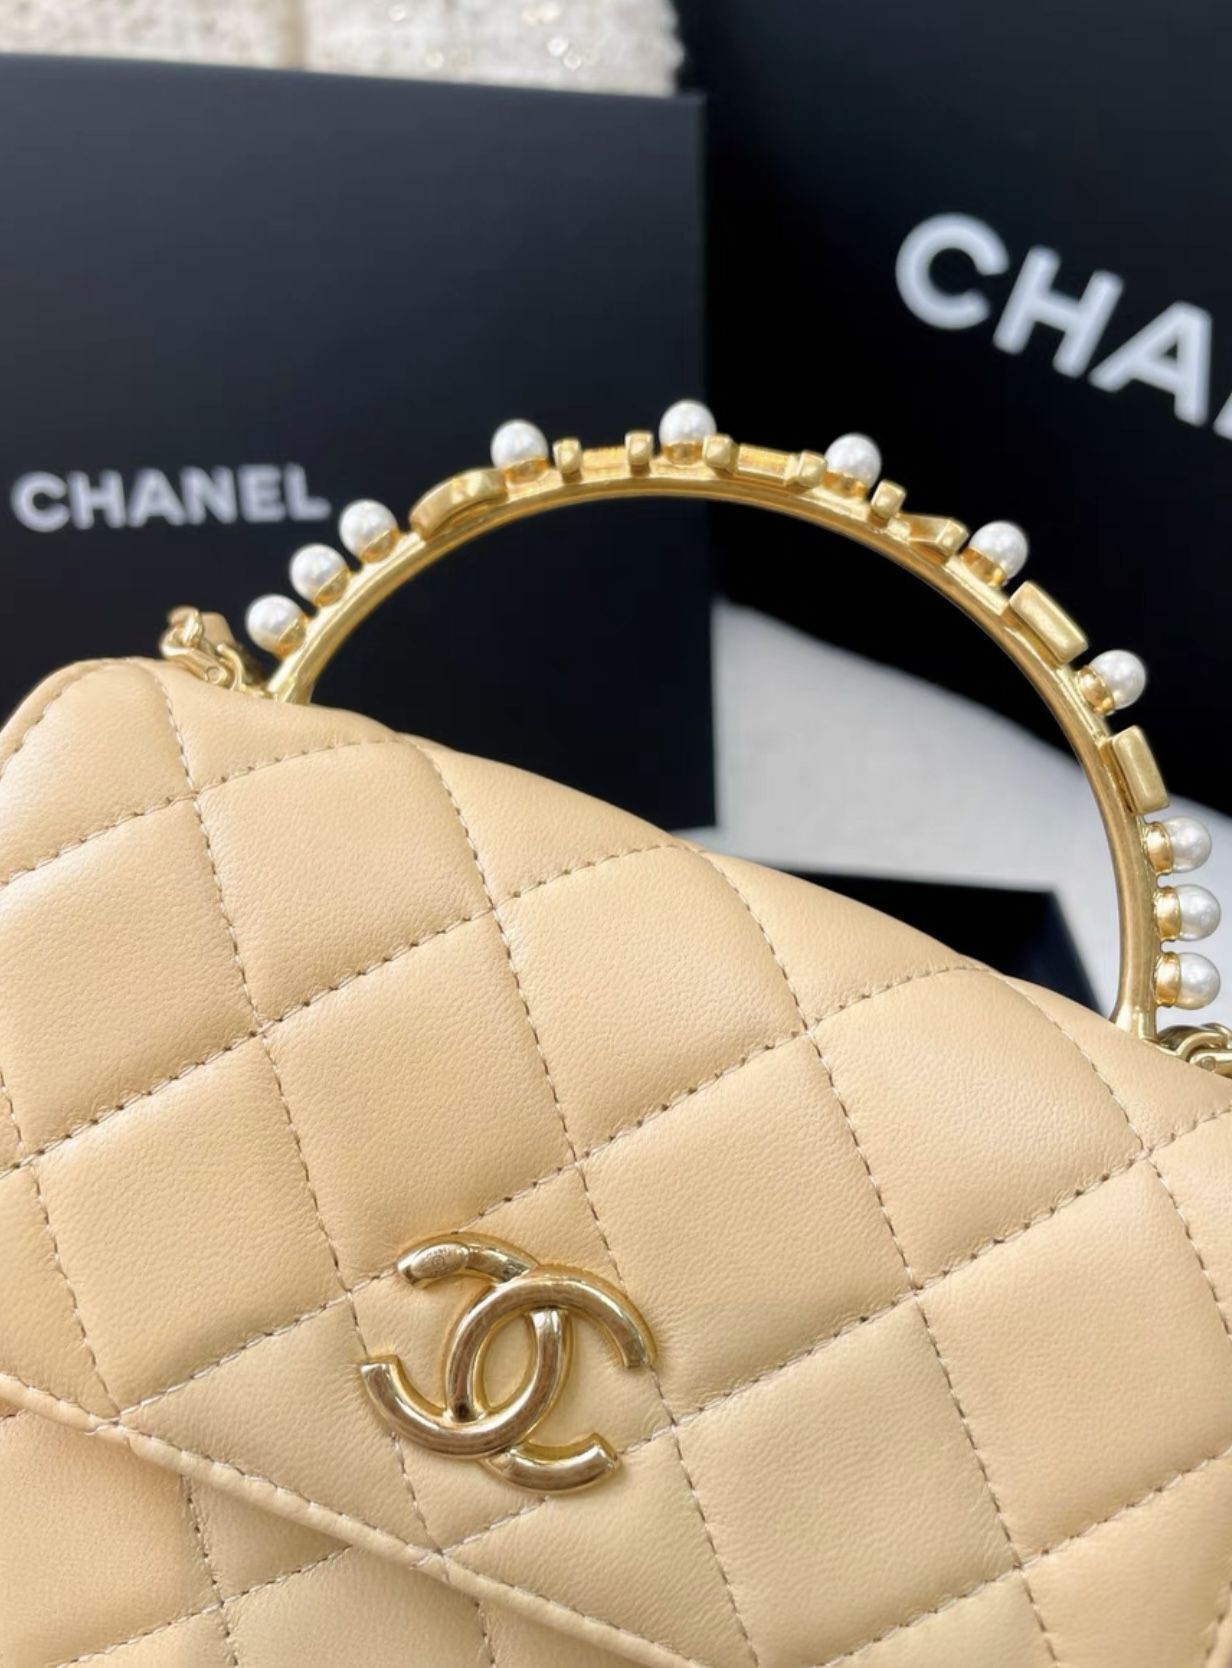 26 rare vintage handbags from Louis Vuitton, Chanel and Hermes we are in  love with - The Singapore Women's Weekly